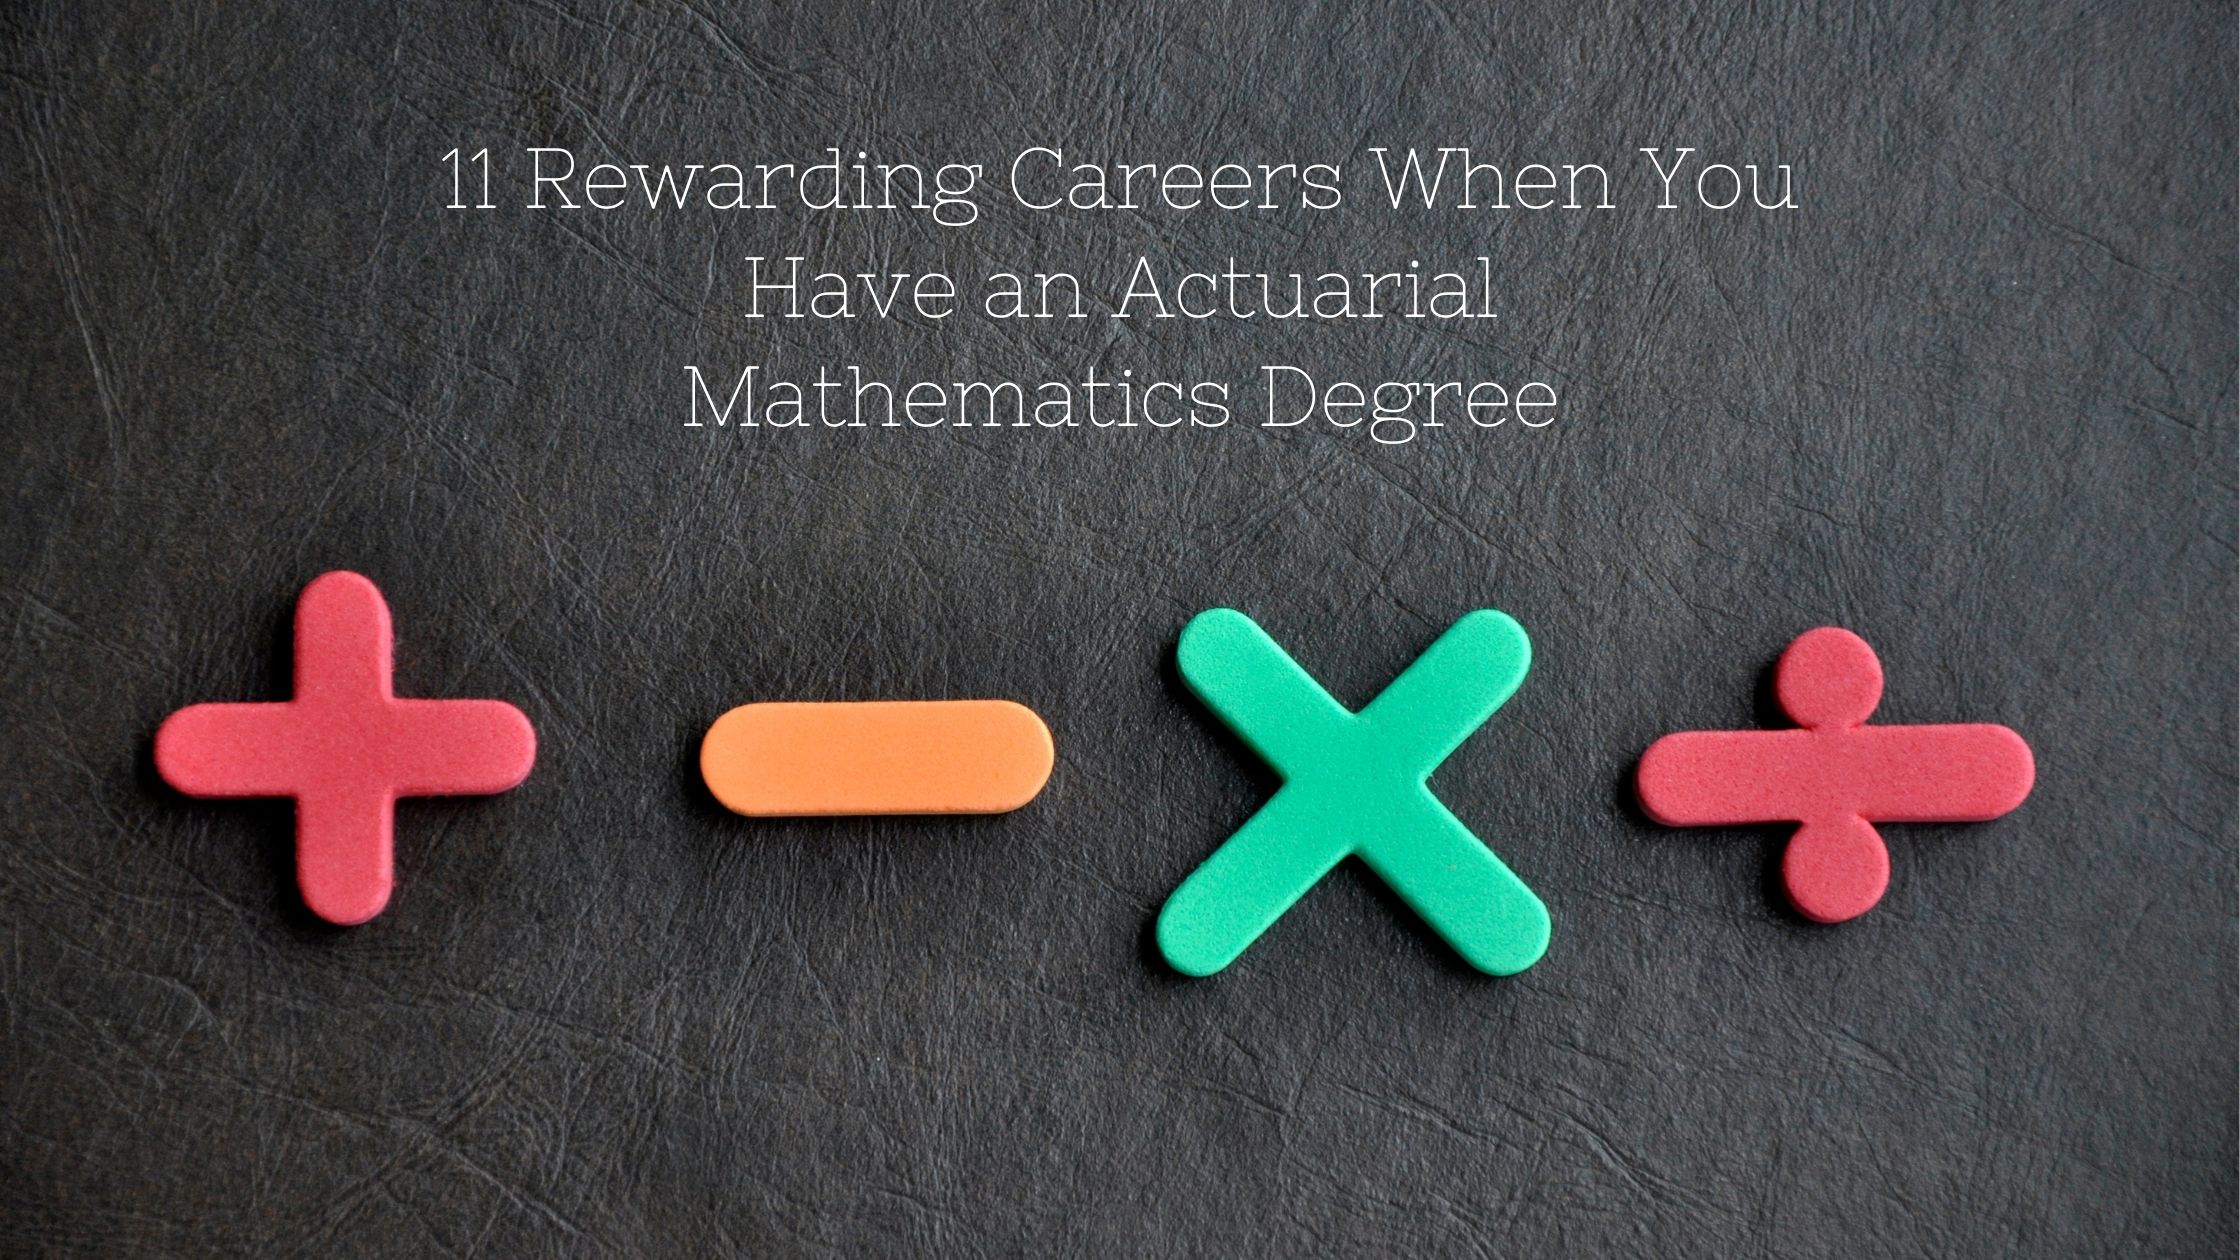 Image of 11 Rewarding Careers When You Have an Actuarial Mathematics Degree  